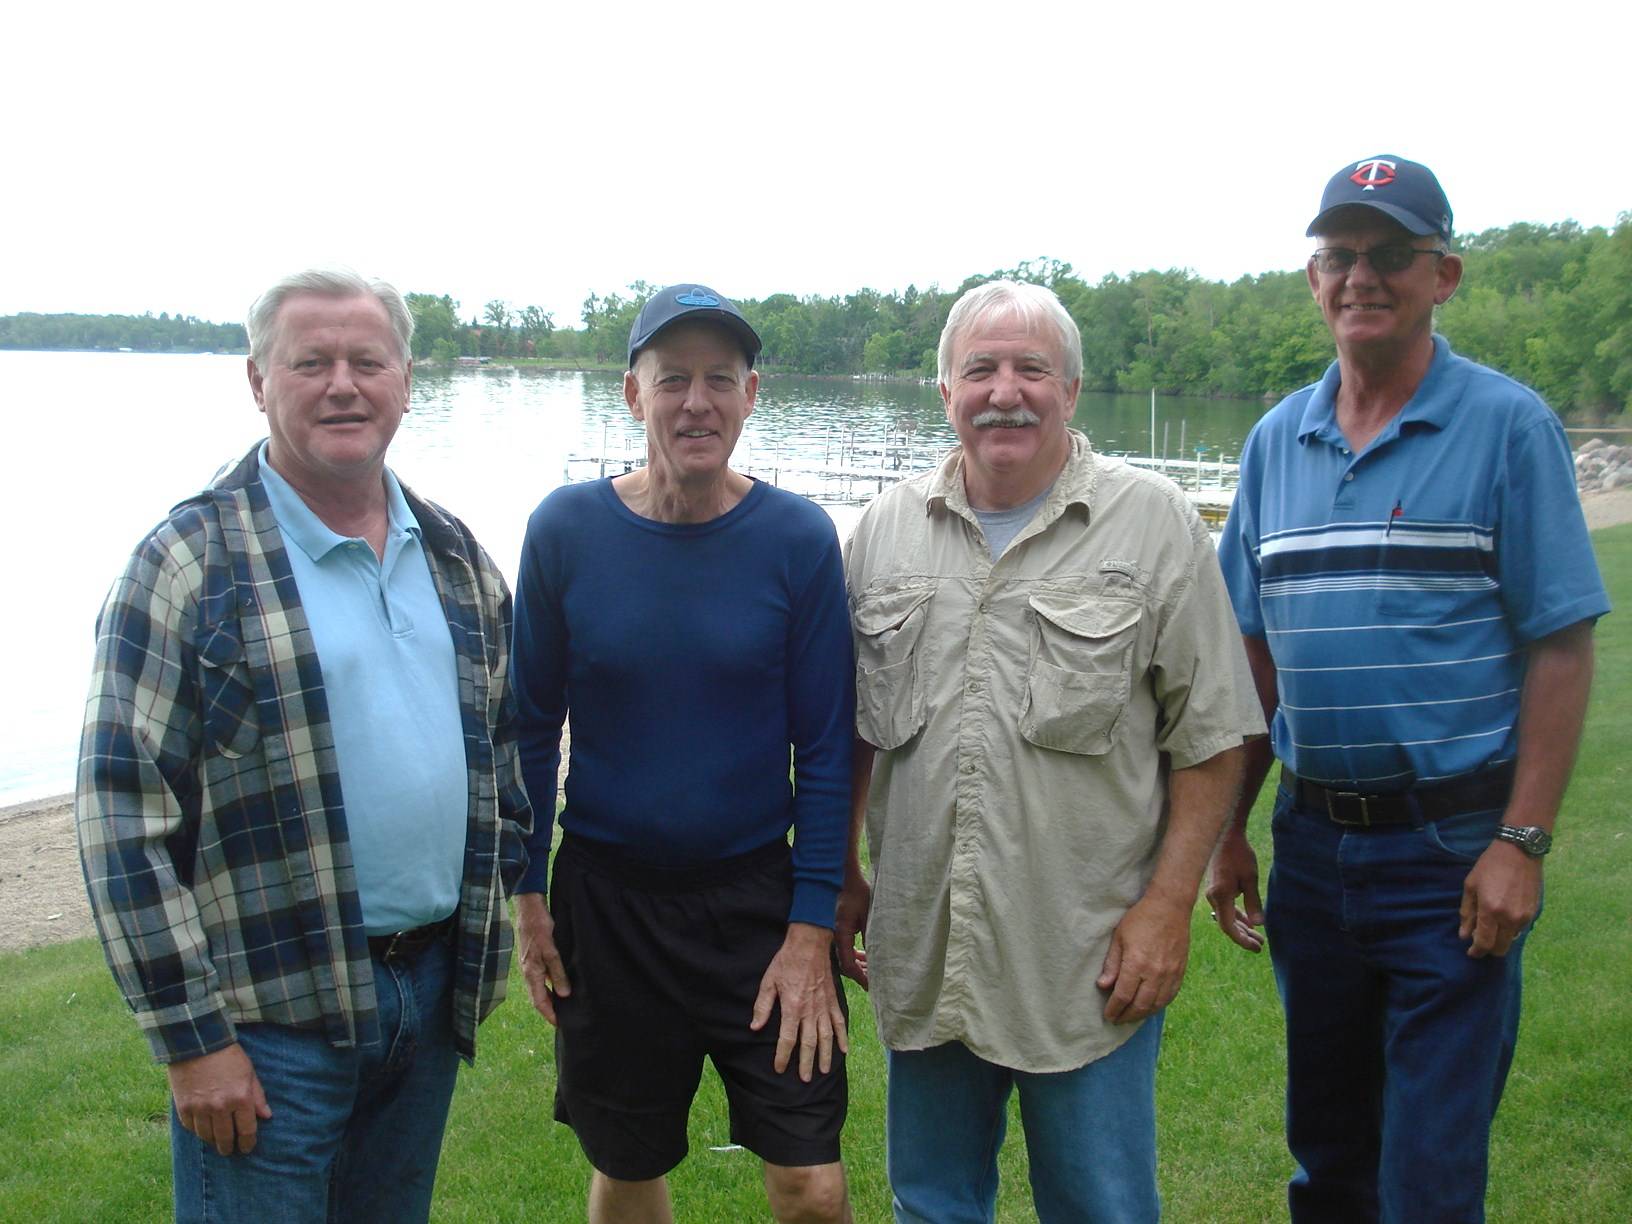 Contemporary photo of 4 older gentlemen standing by a lake.